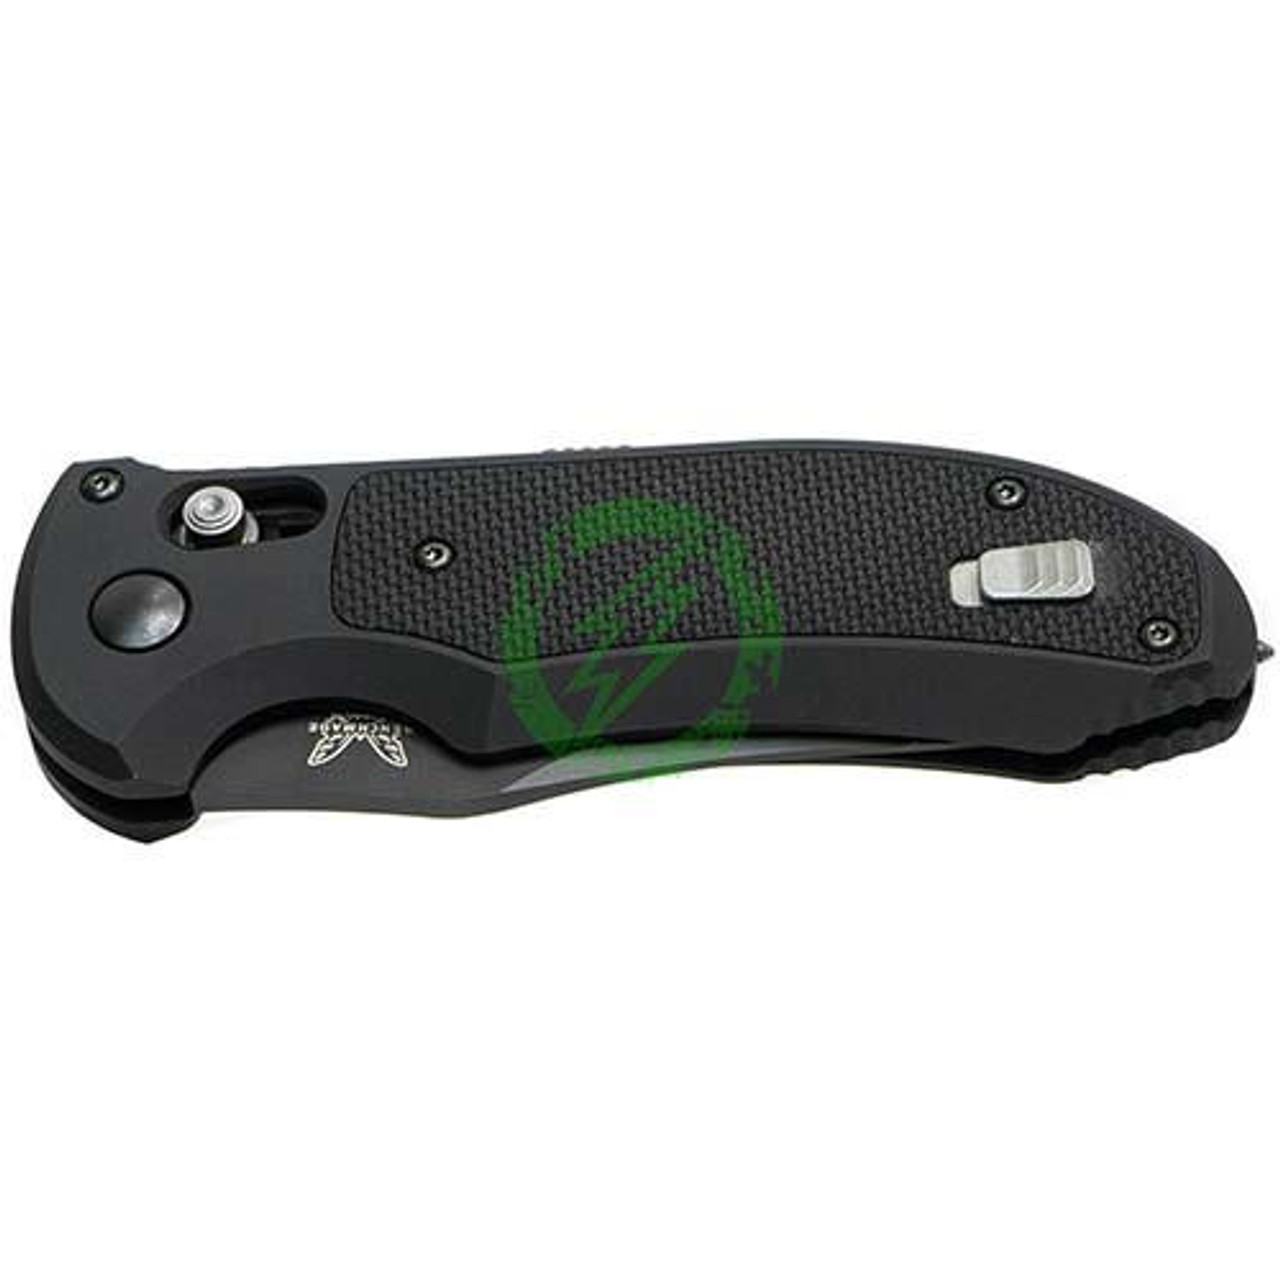  Benchmade Auto Tactical Triage Drop-Point Black Contoured G10 with Stainless Steel Liners Handle 